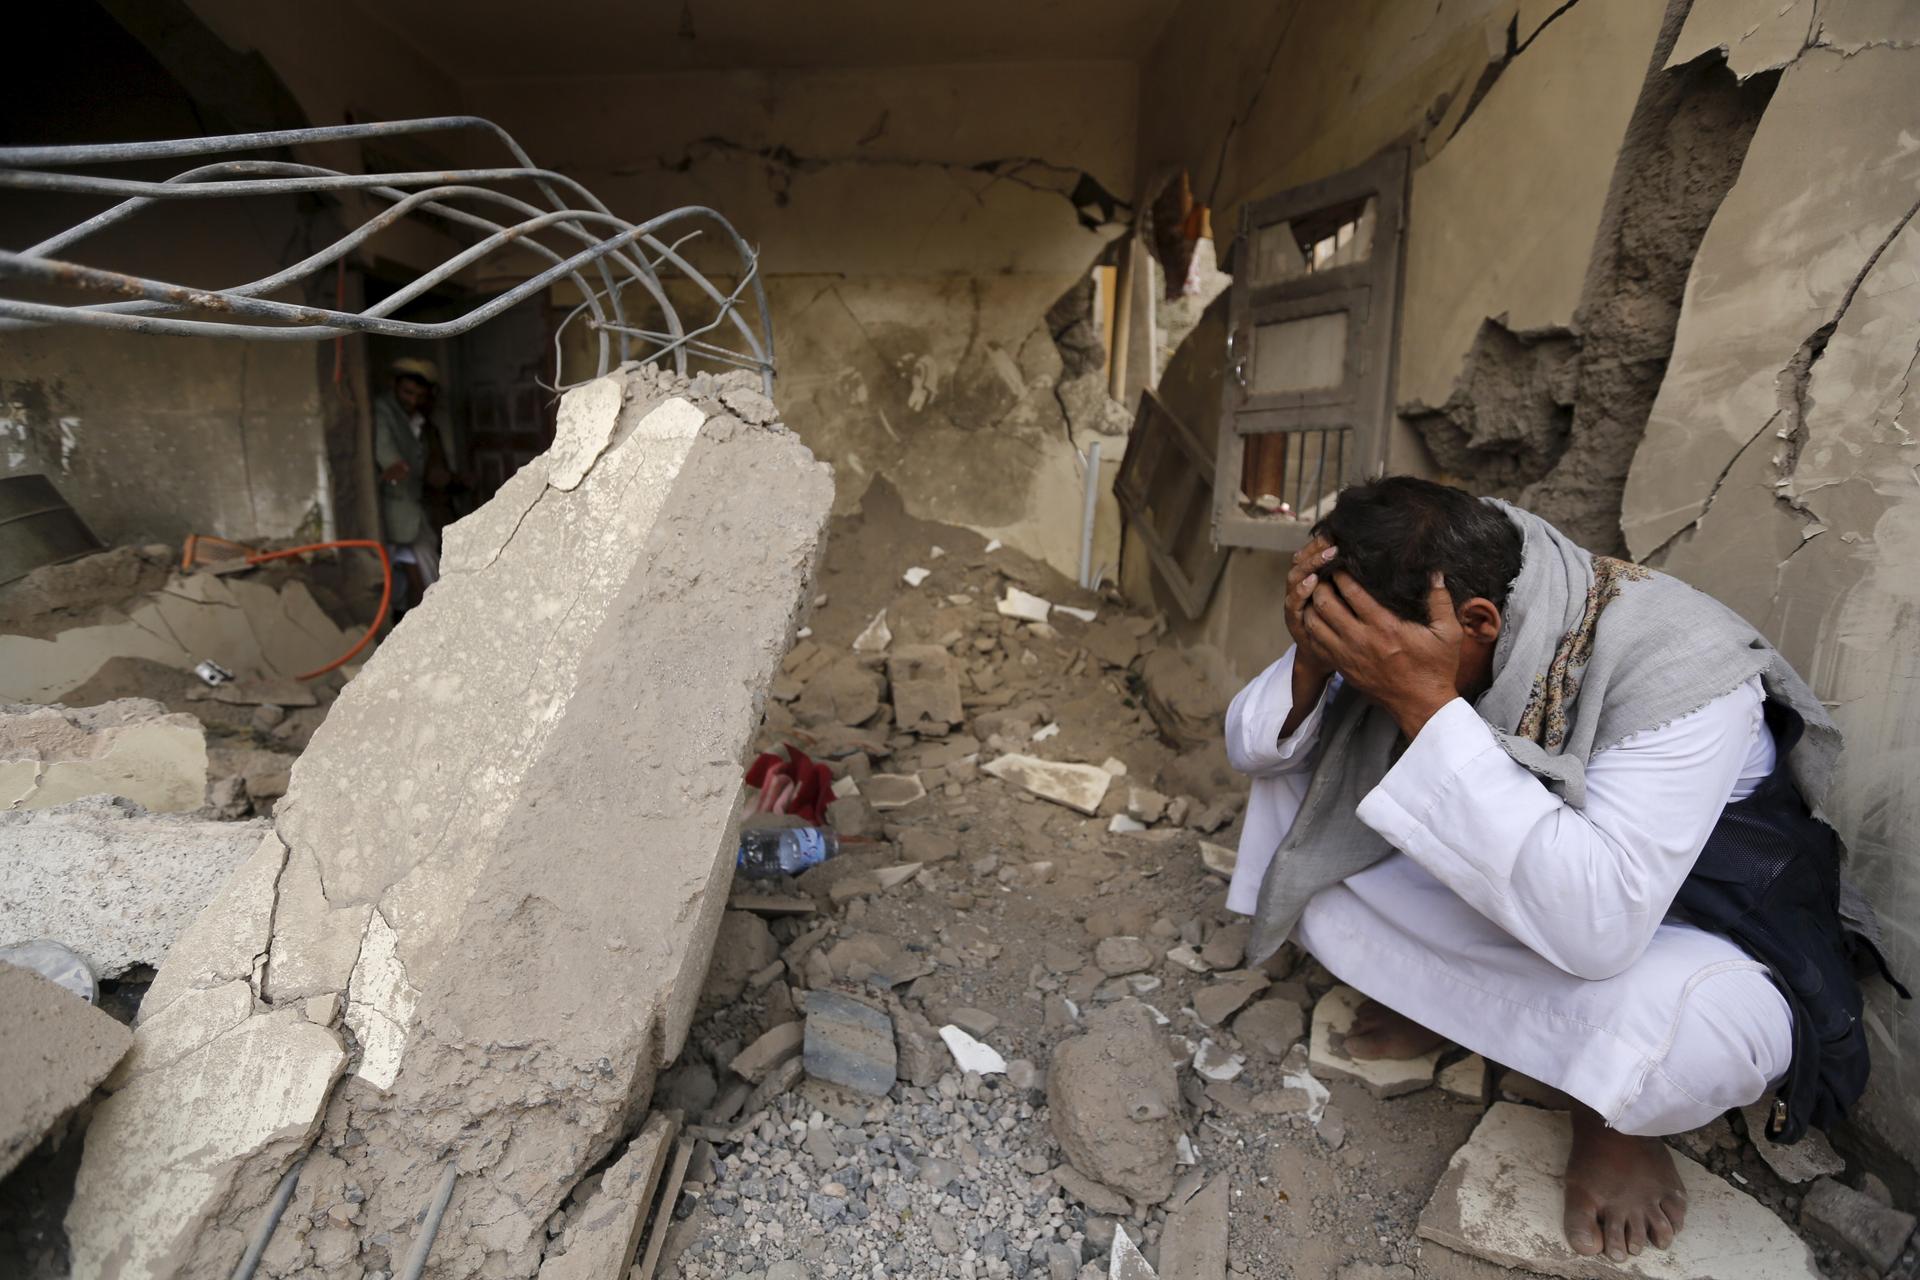 A man who lost his relatives in a Saudi-led air strike cries at the site of the air strike in Yemen's capital Sanaa September 21, 2015.